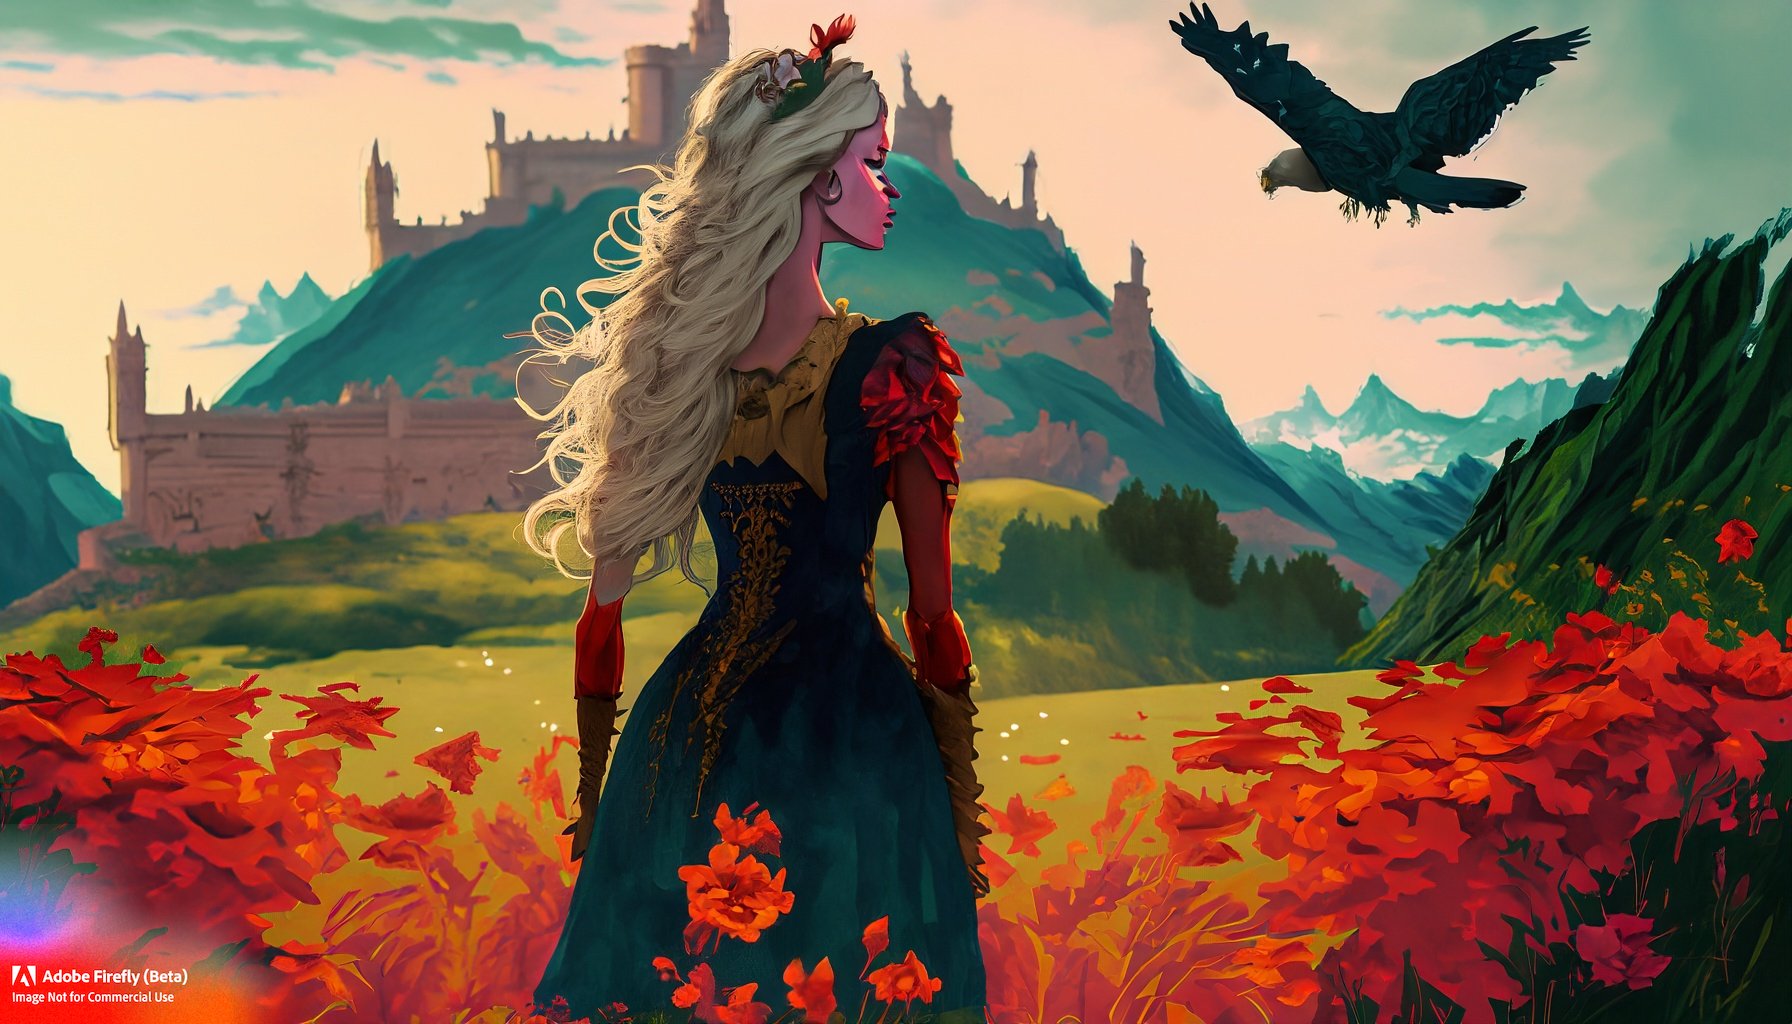 Firefly_a+blonde fae female facing away from the camera, standing in a meadow of red and orange flowers, with a mountain range of deep greens and a castle in the background, a hawk flying_art,wide_angle_.jpg